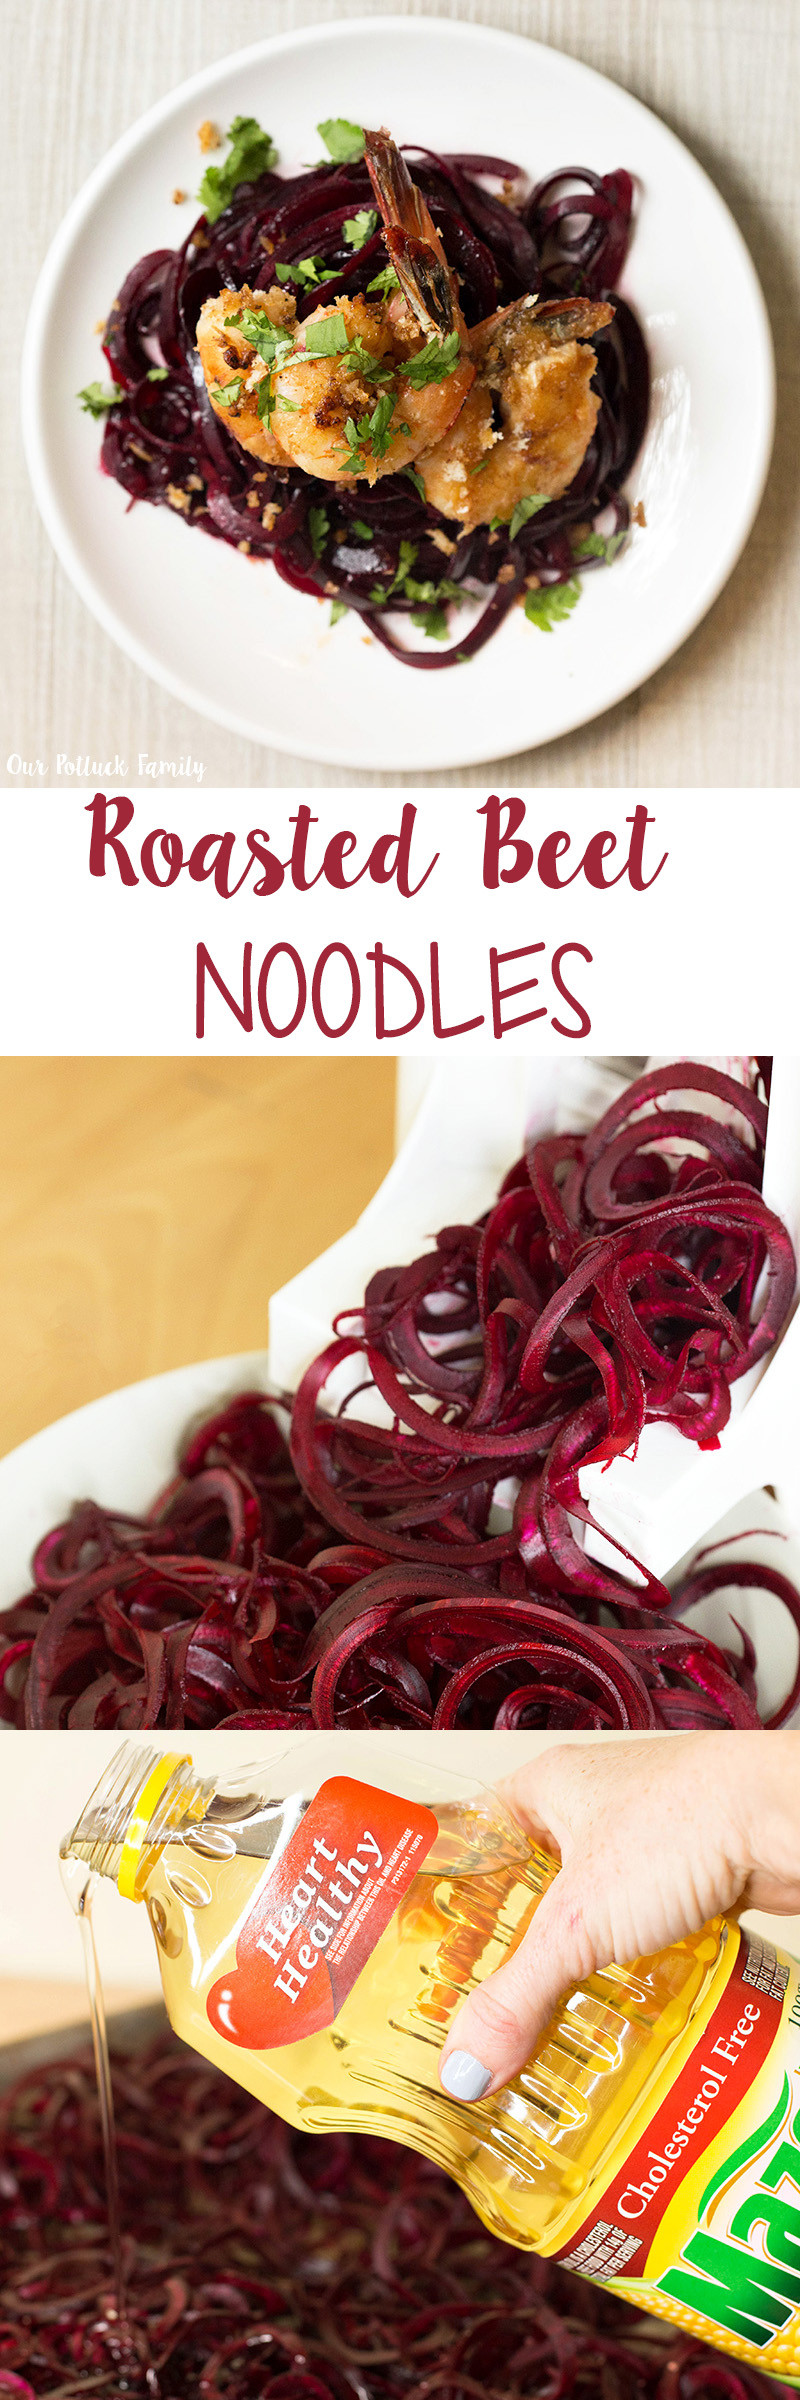 Beet Noodles Recipe
 Shrimp Scampi with Beet Noodles Recipe Our Potluck Family